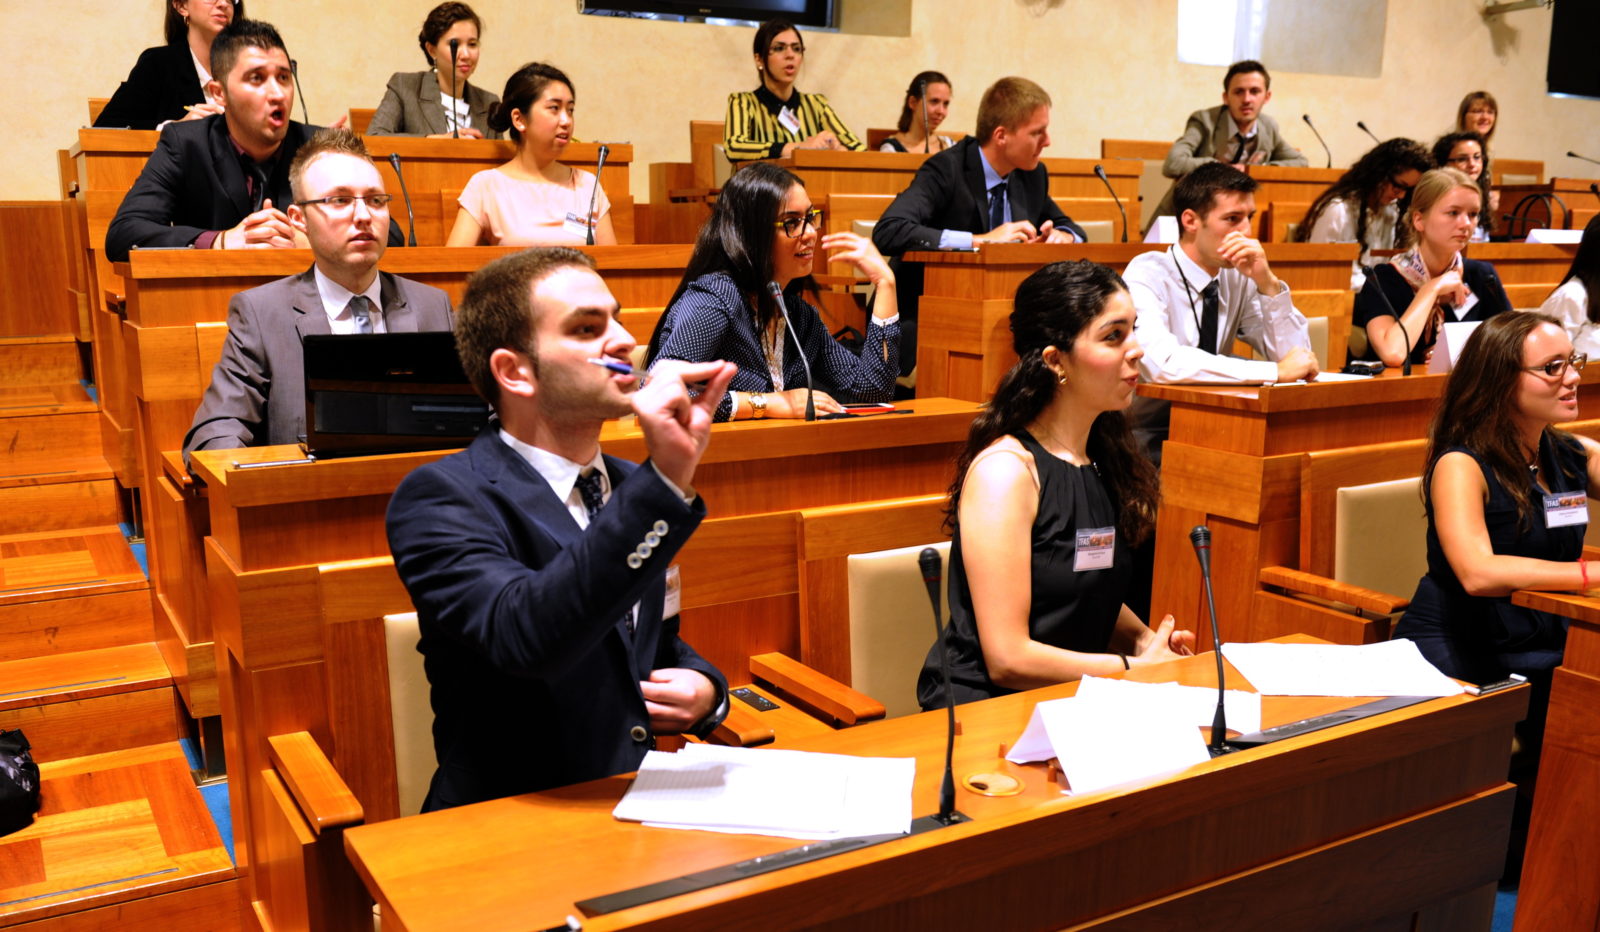 AIPES students participate in a conflict management simulation at the parliament of the Czech Republic. 